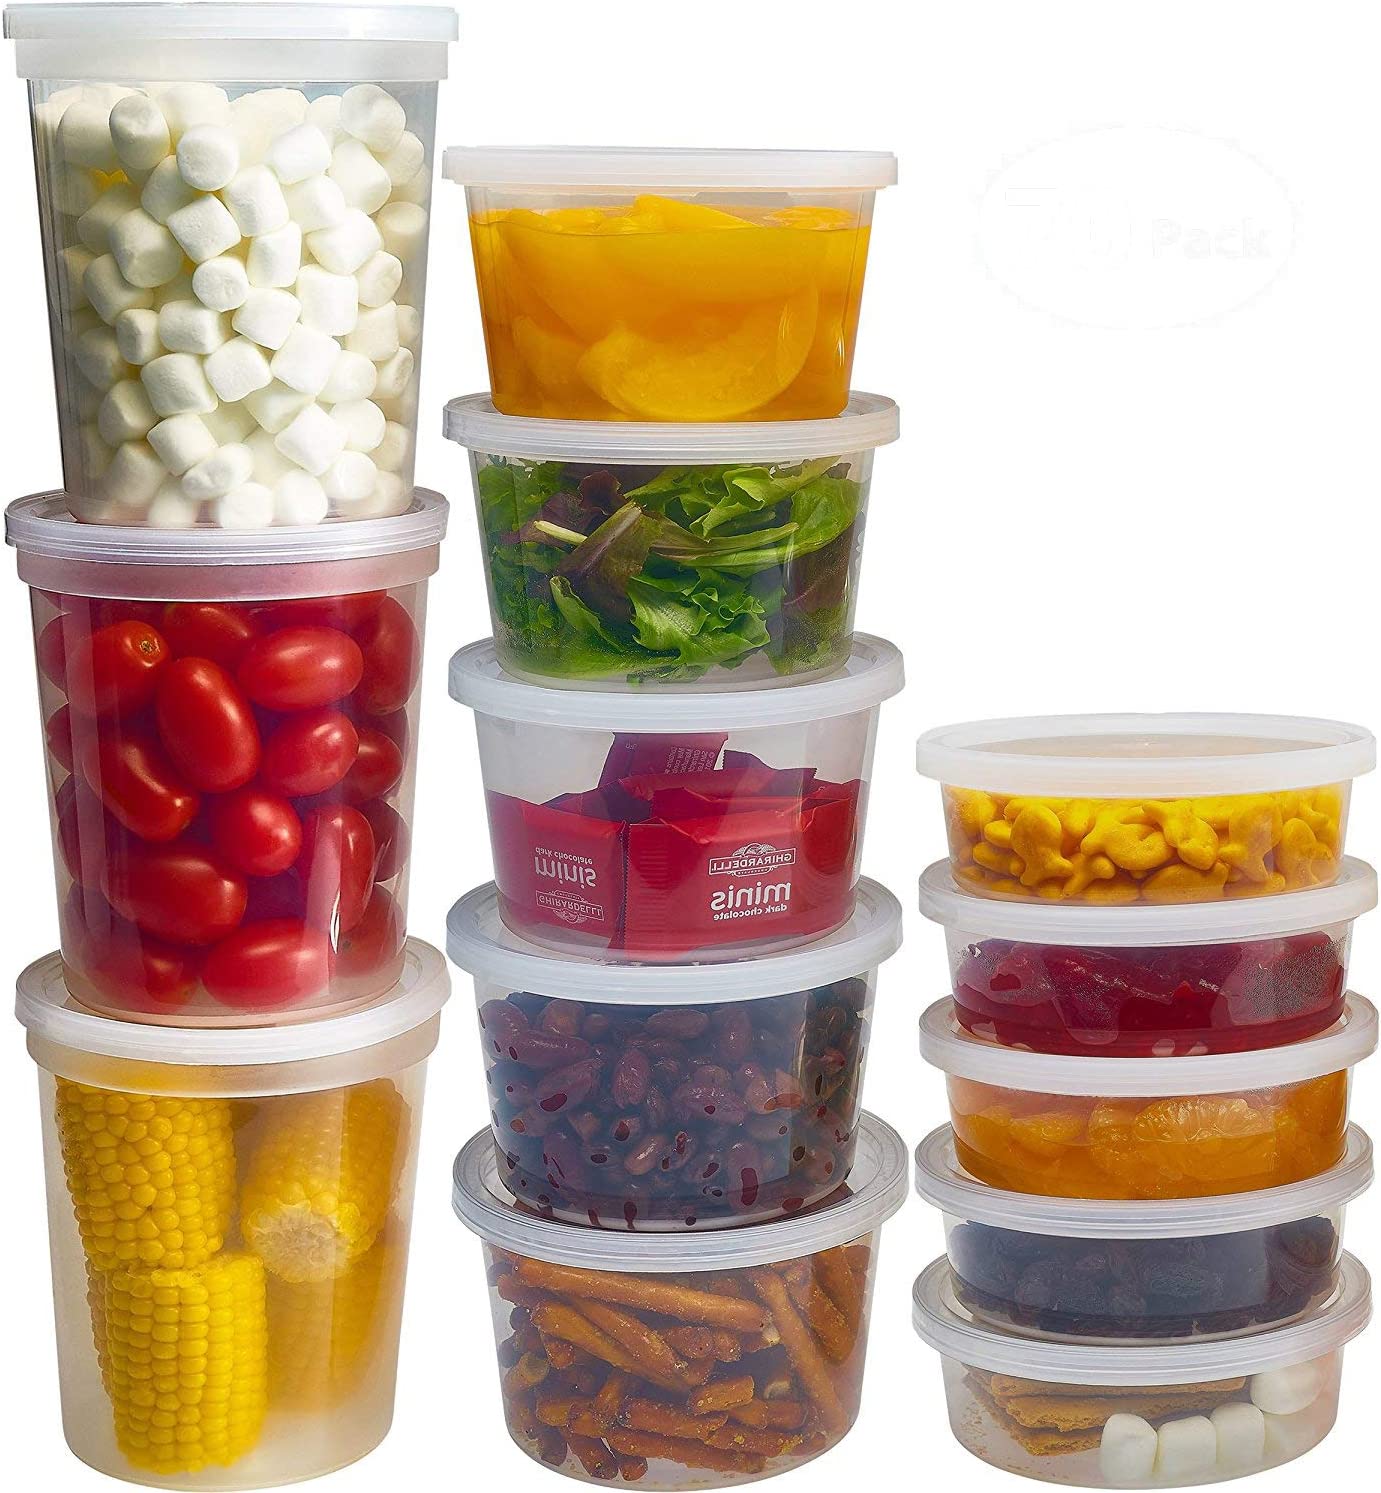 https://www.wellandgood.com/wp-content/uploads/2023/05/durahome-food-storage-containers-with-lids.jpg